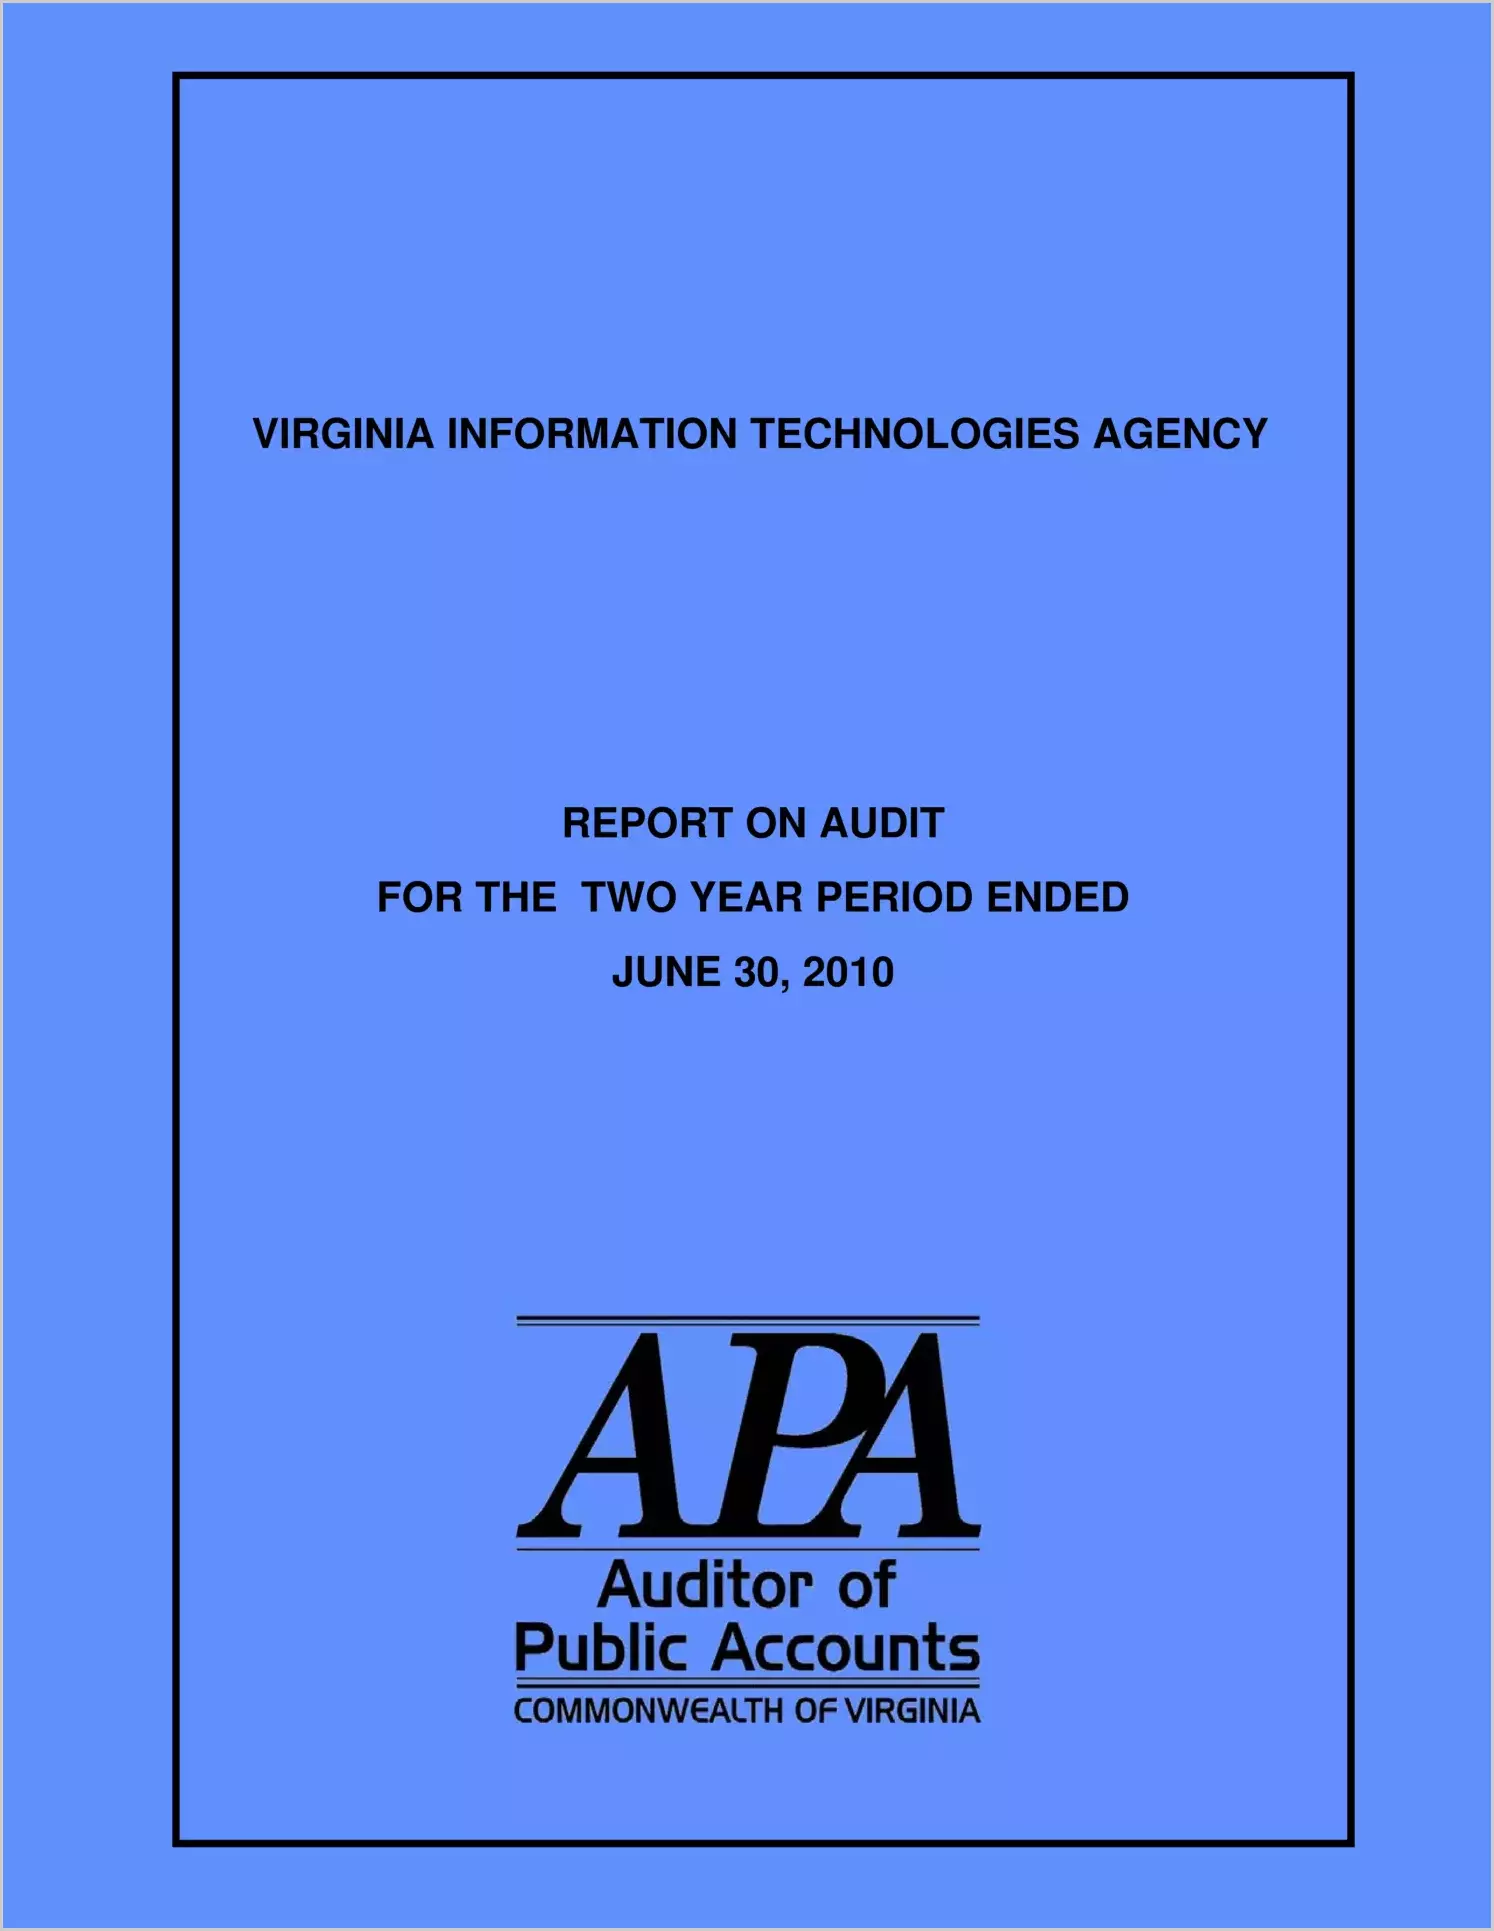 Virginia Information Technologies Agency for the two year period ended June 30, 2010